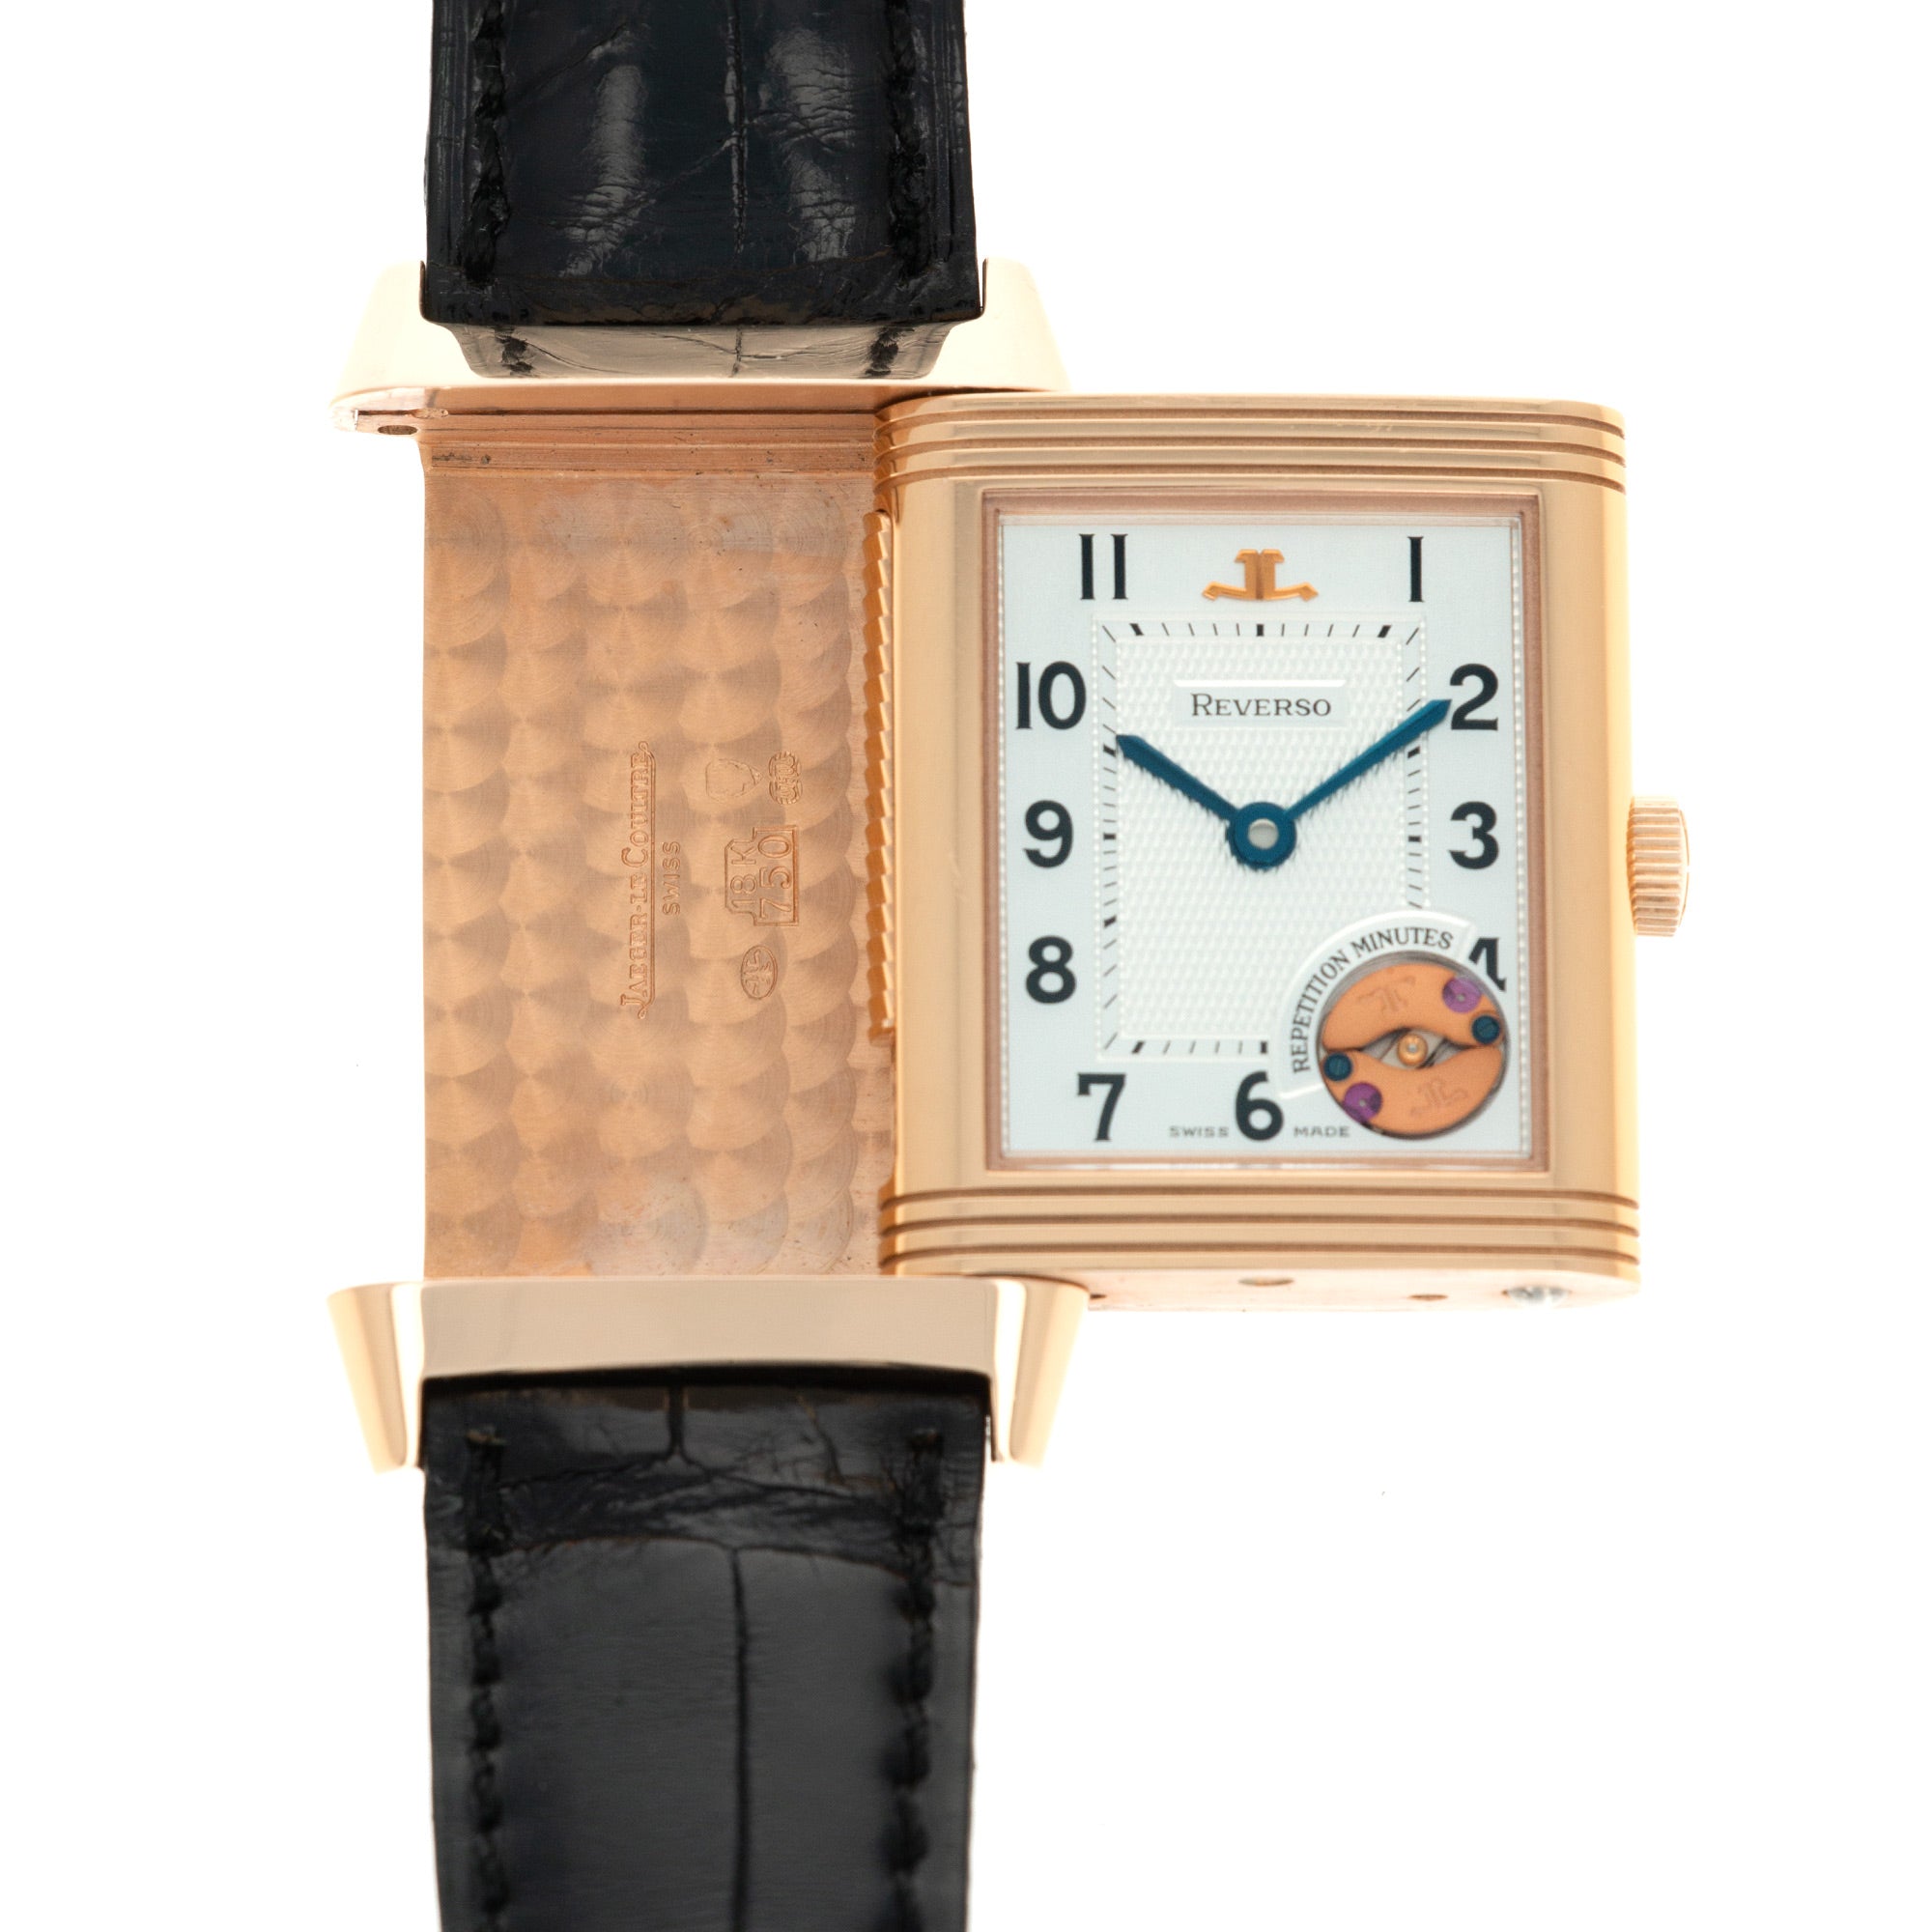 Jaeger LeCoultre - Jaeger Lecoultre Rose Gold Minute Repeater Reverso Watch, Ref. 270.2.73 - The Keystone Watches